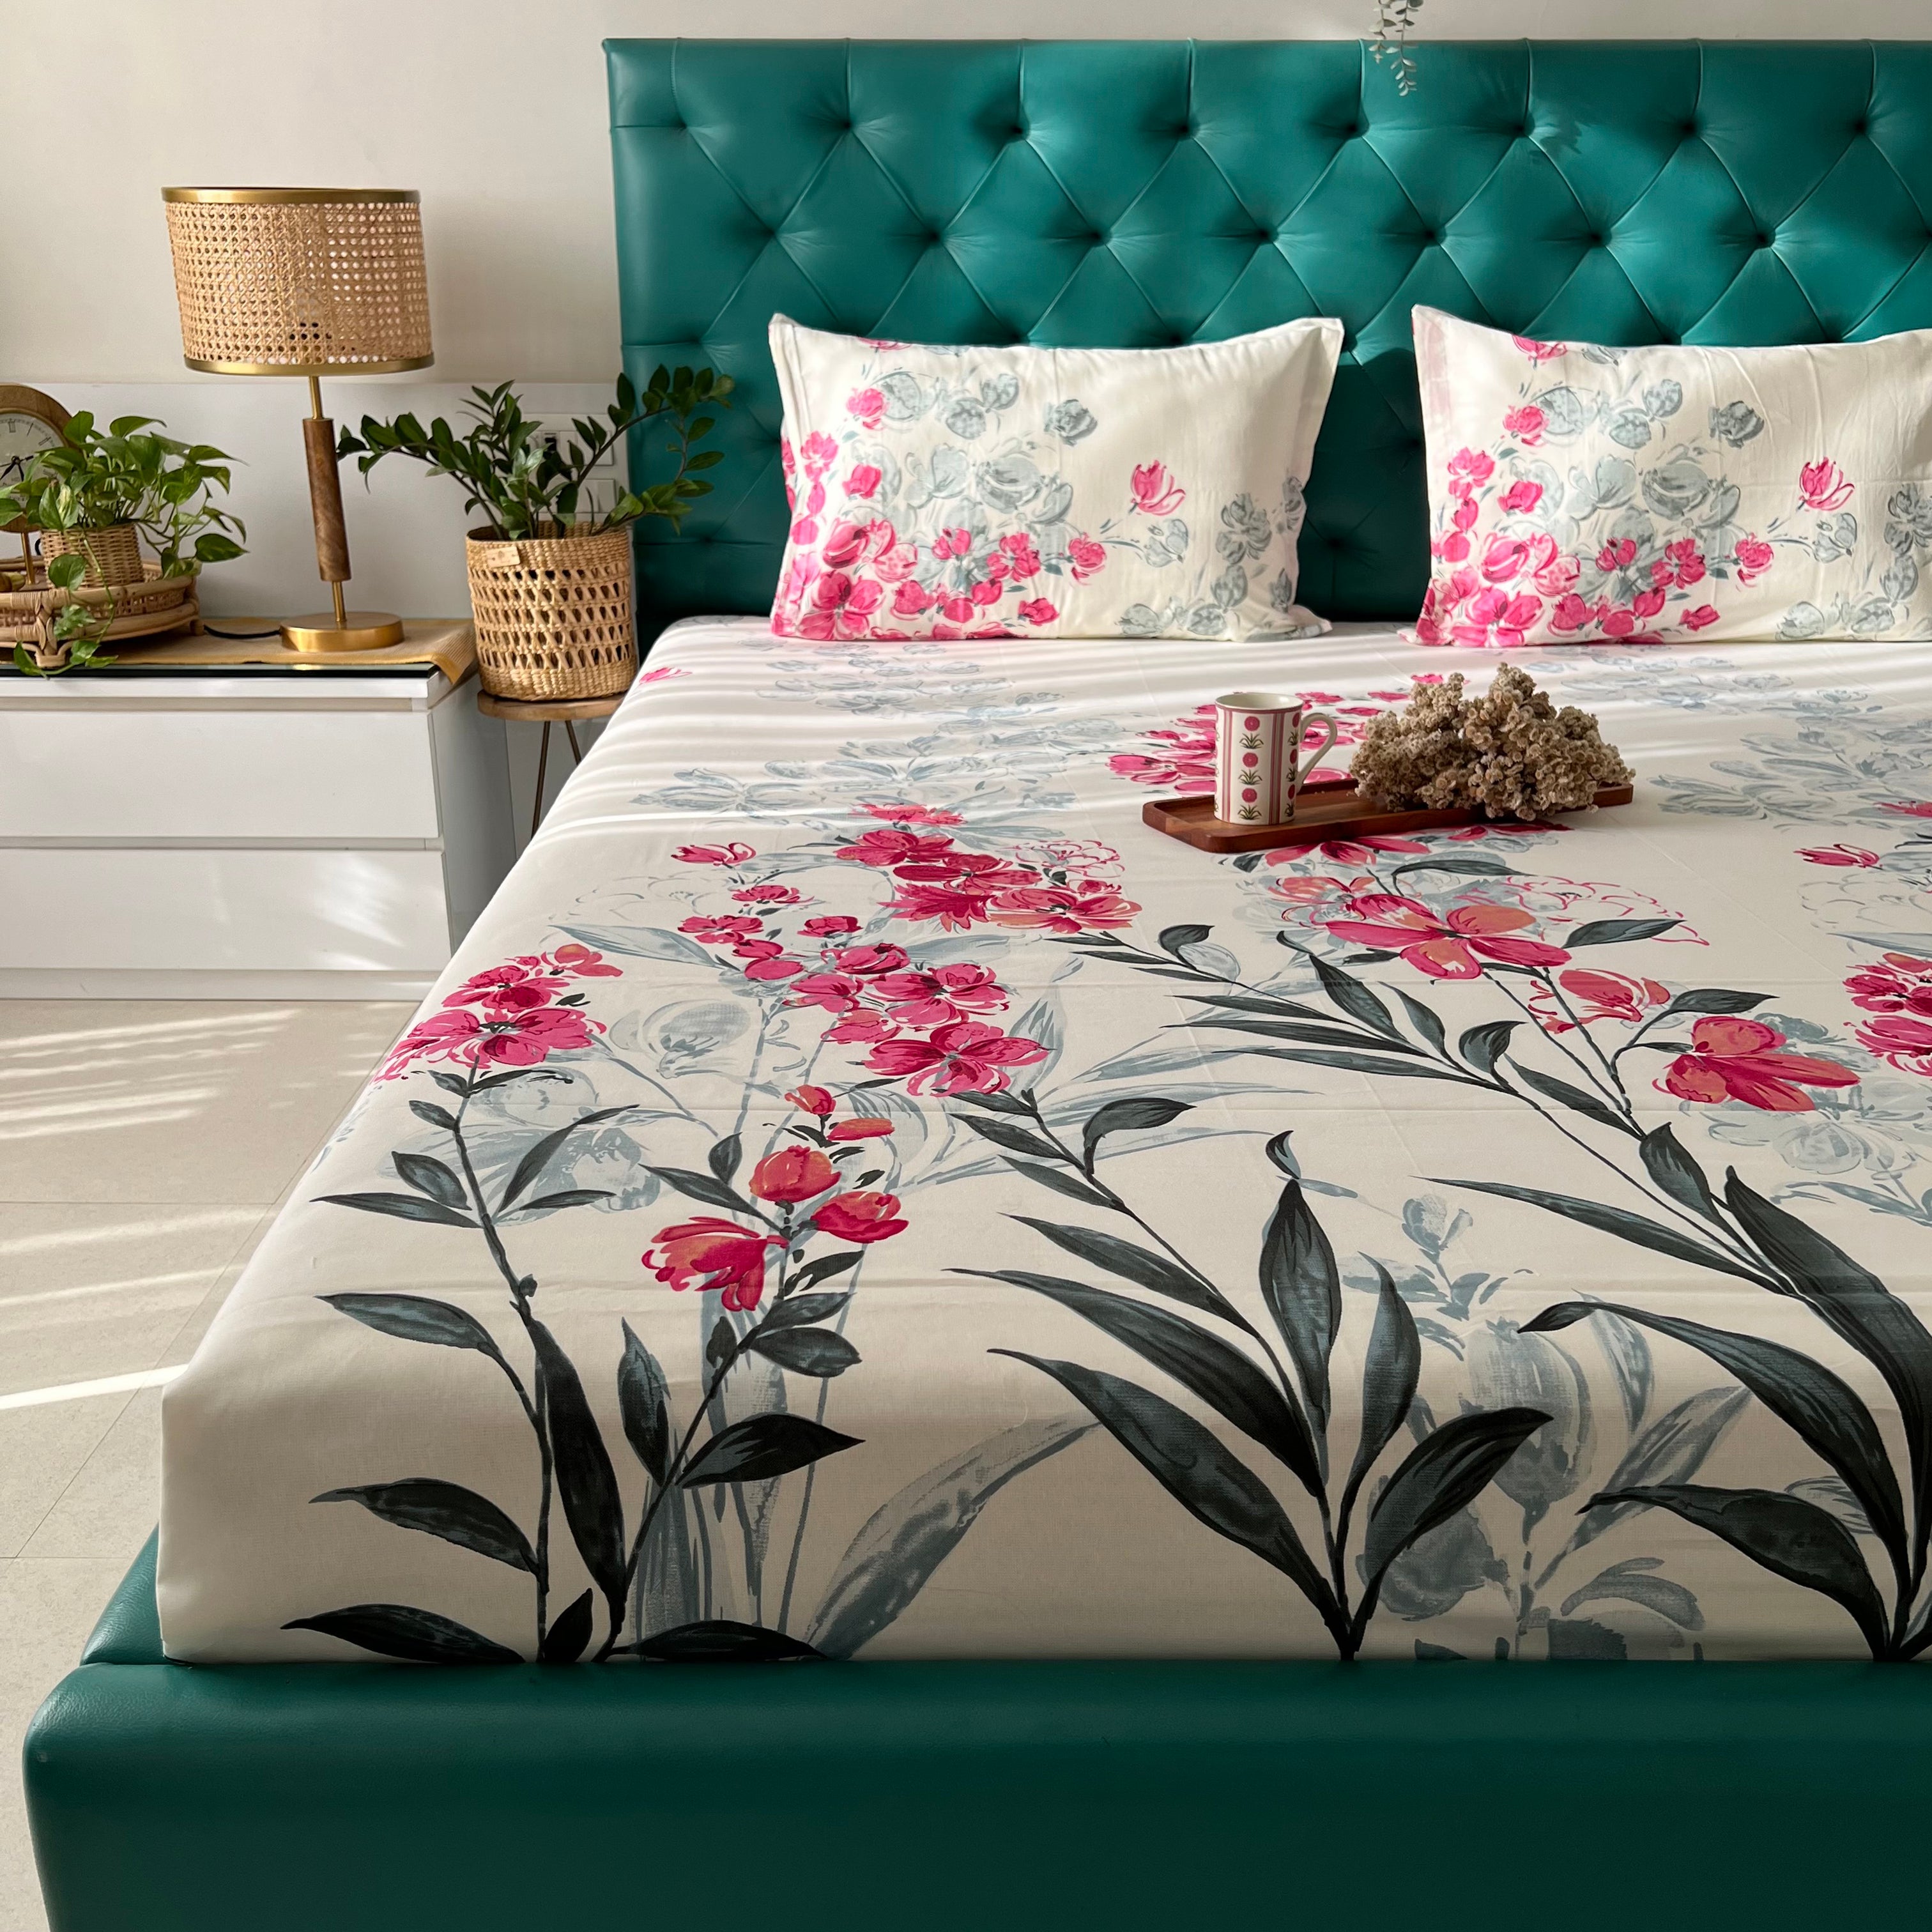 The Art of Crafting Bedsheets: Understanding the Full Manufacturing Process